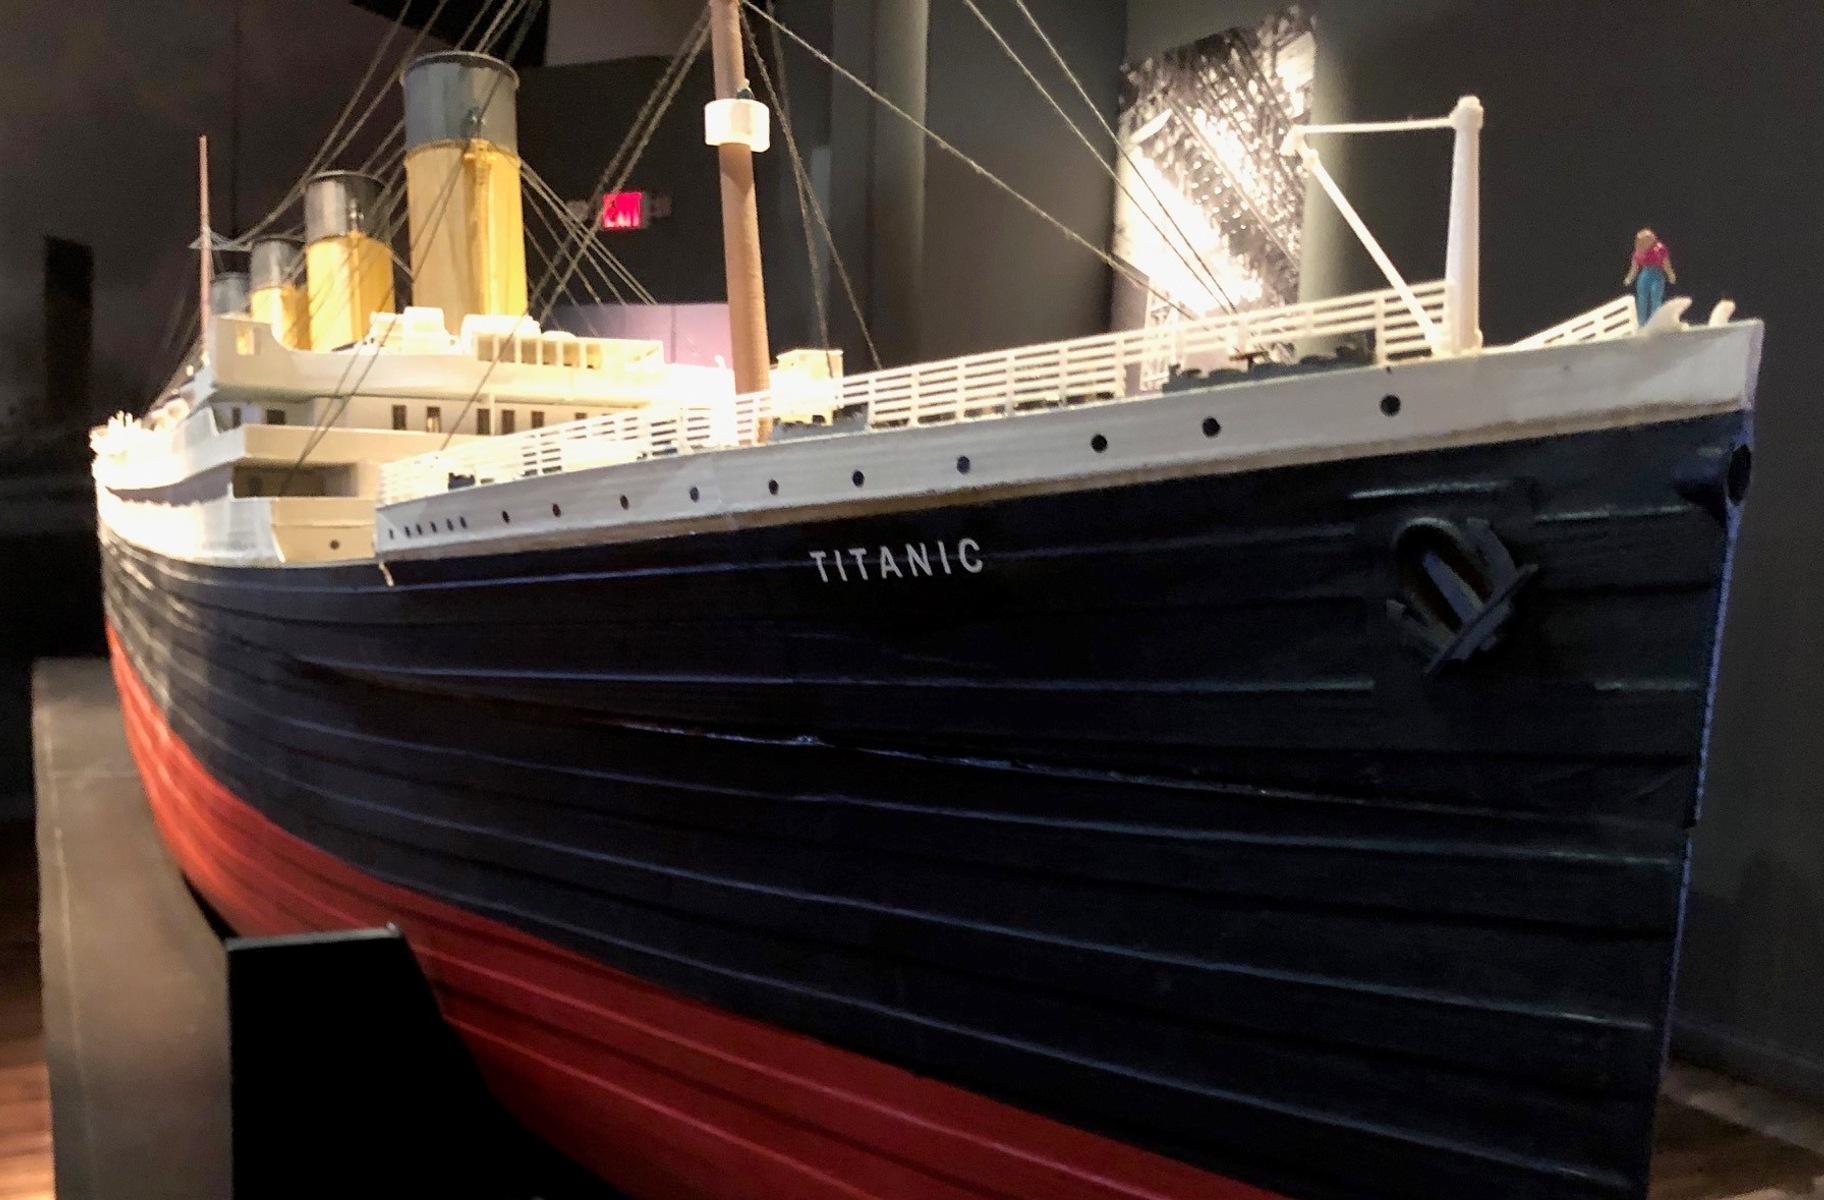 A look inside “Titanic: The Exhibition,” which just opened at Westfield Old Orchard. (Marc Vitali / WTTW News)A look inside “Titanic: The Exhibition,” which just opened at Westfield Old Orchard. (Marc Vitali / WTTW News)